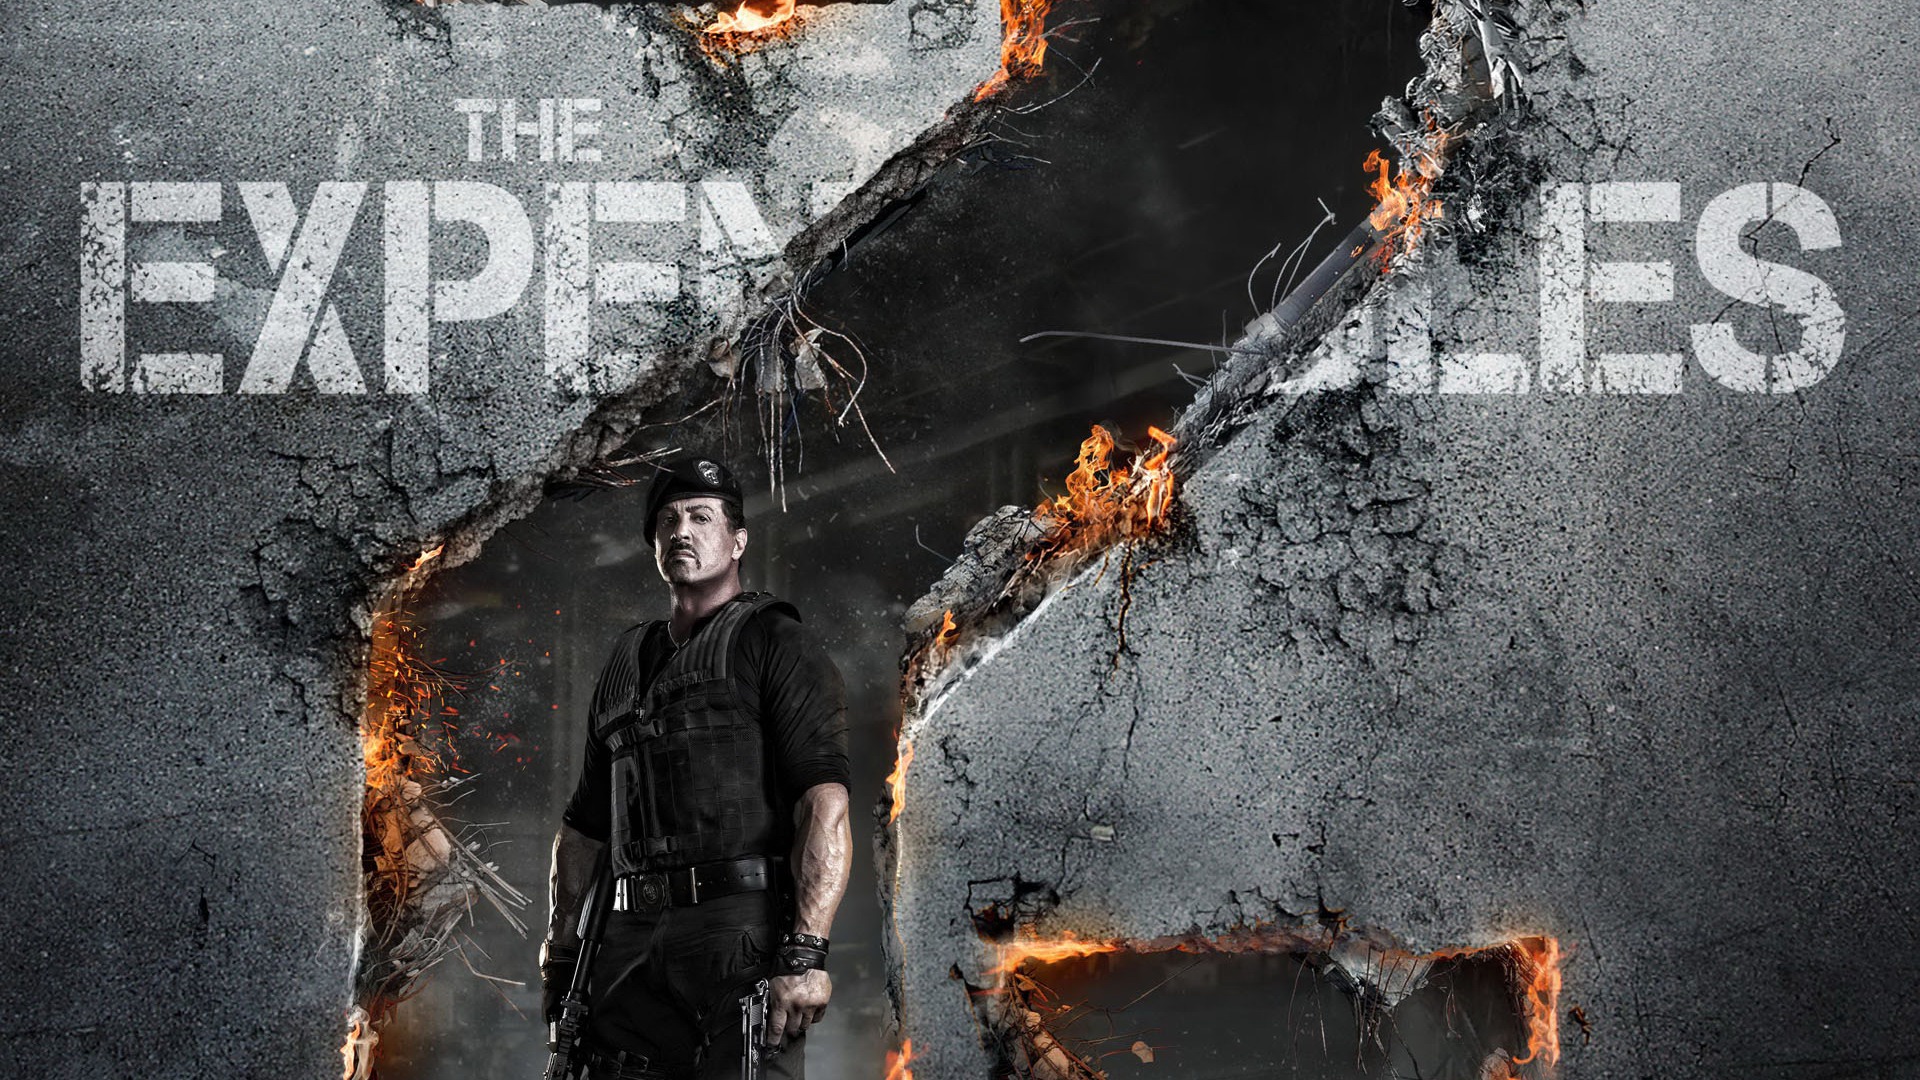 2012 Expendables2 HDの壁紙 #2 - 1920x1080